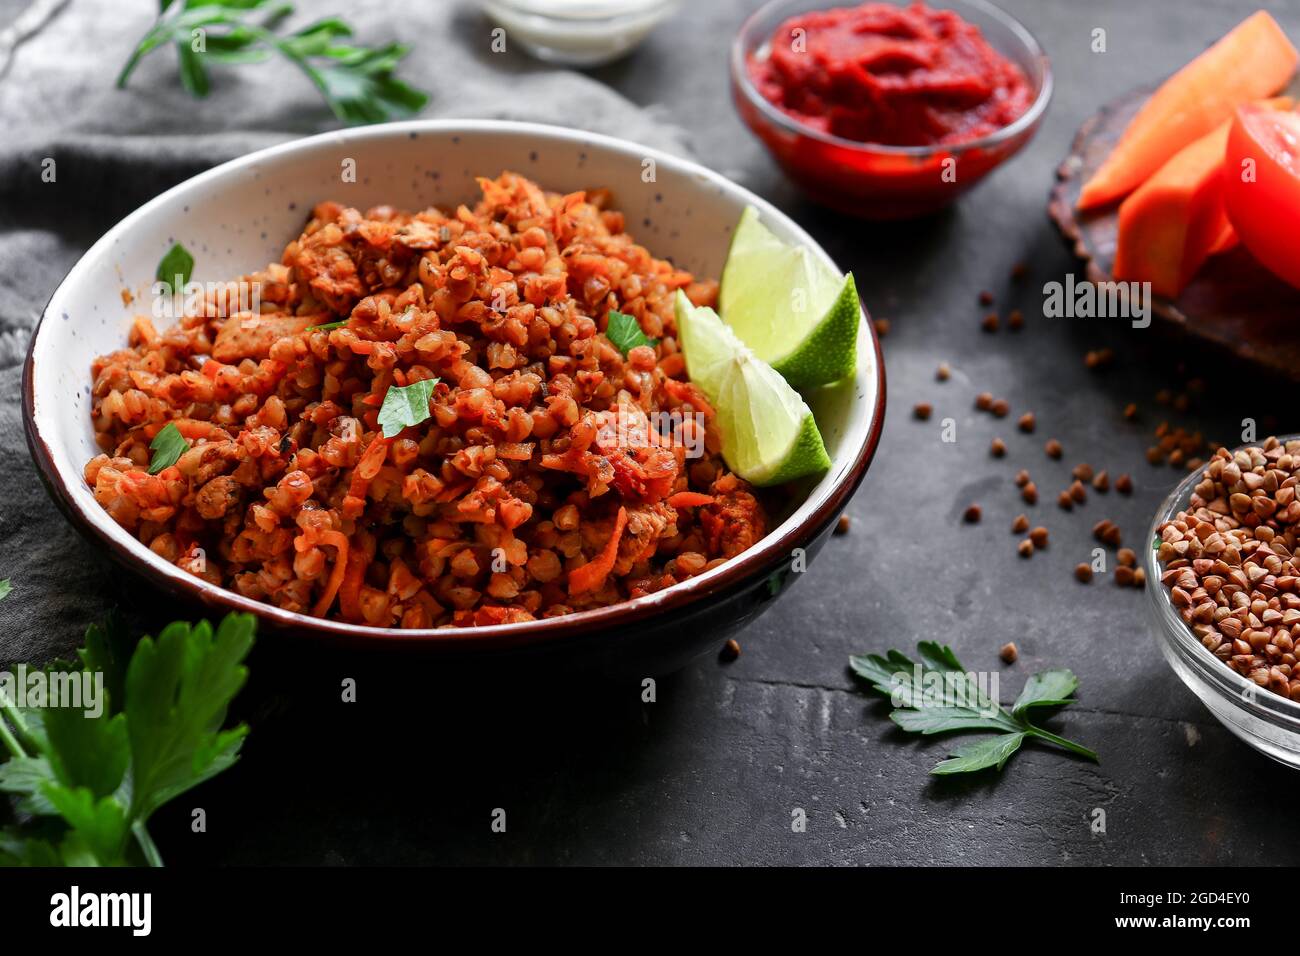 Healthy food concept. Buckwheat porridge with tomato sauce. Dark background. Copy space. Diet lunch. Ingredients. Stock Photo